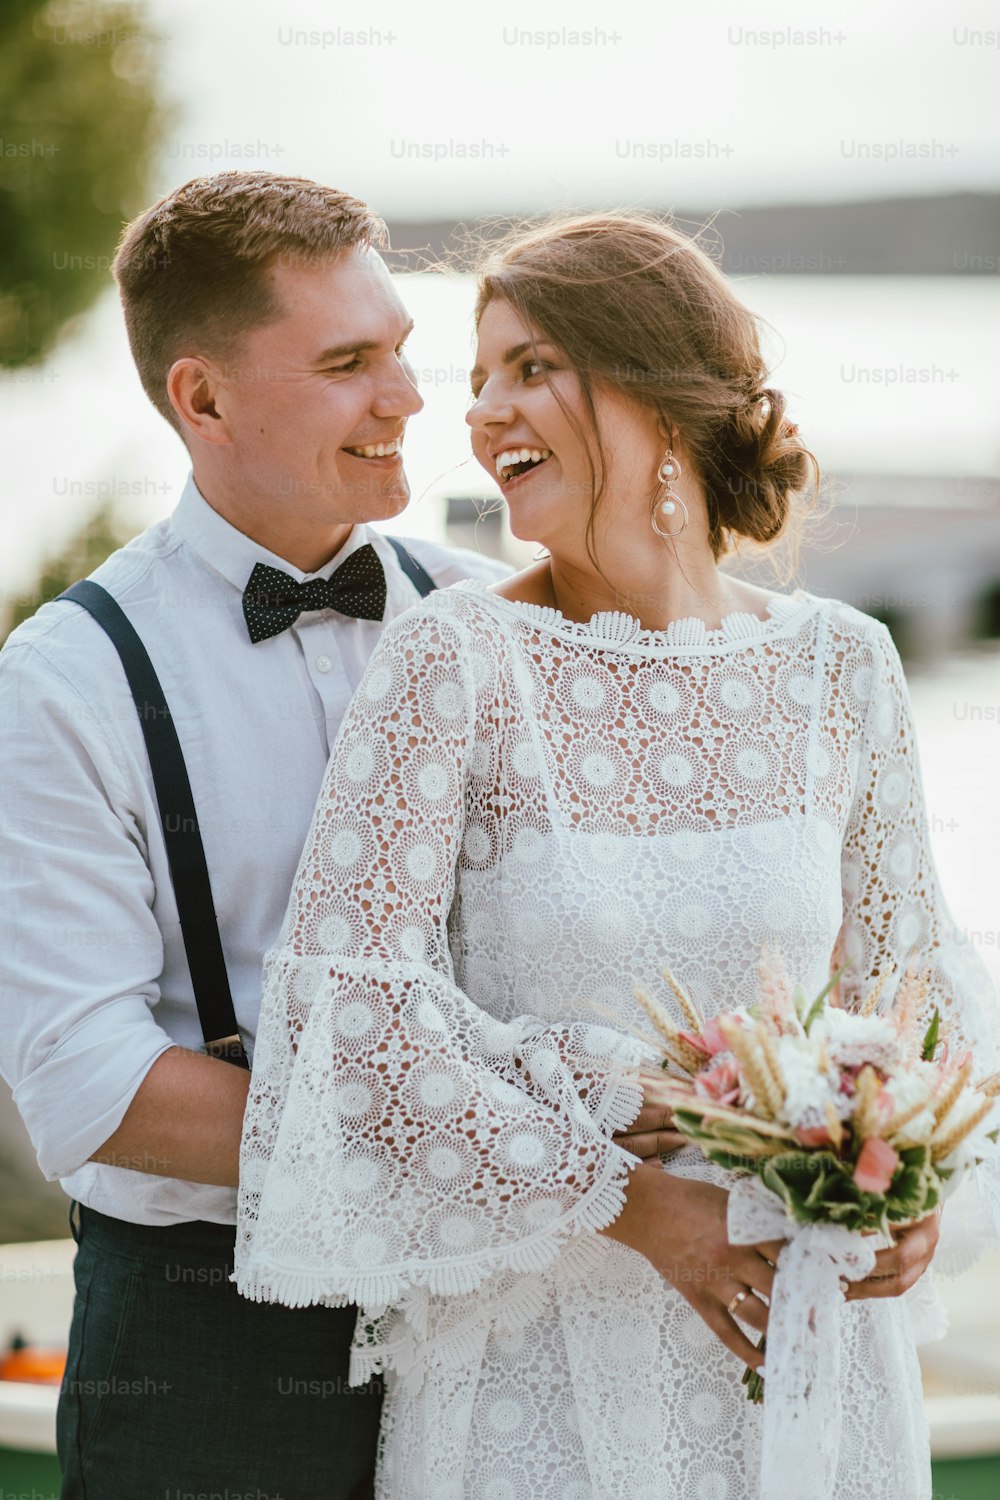 Happy newly married couple, smiling bride brunette young woman with the boho style bouquet with groom, close up portrait outdoors